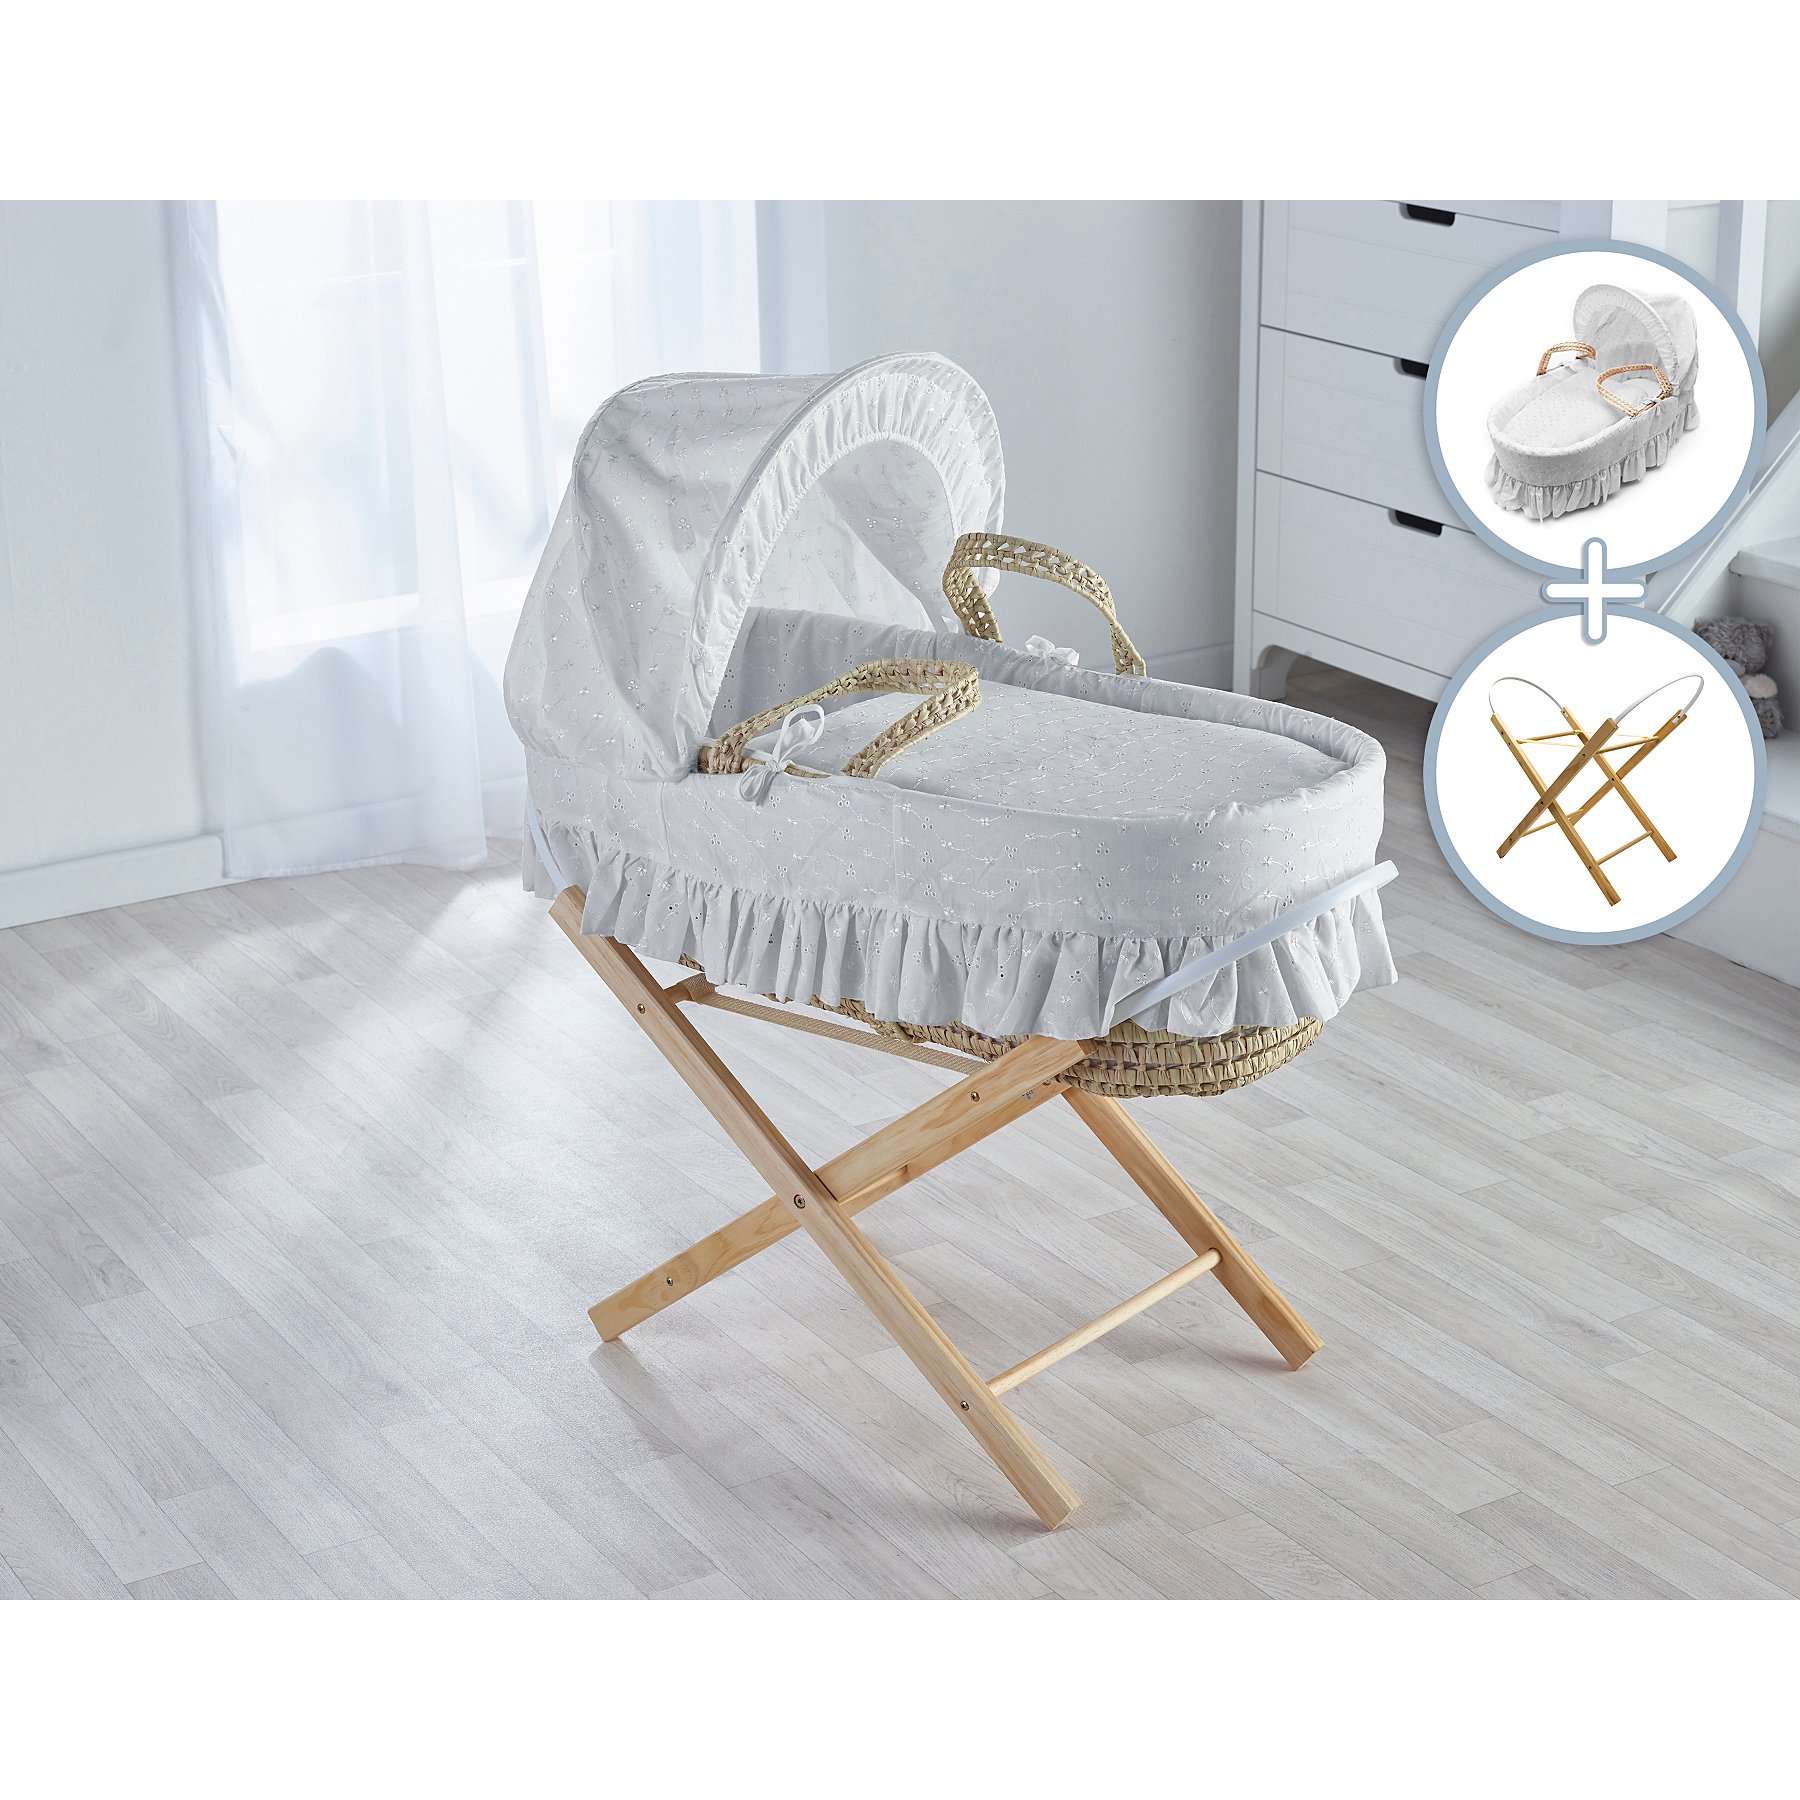 Isabella Alicia Traditional Baby Blue Broderie Anglaise Maize Moses Basket with Folding Stand and Mattress